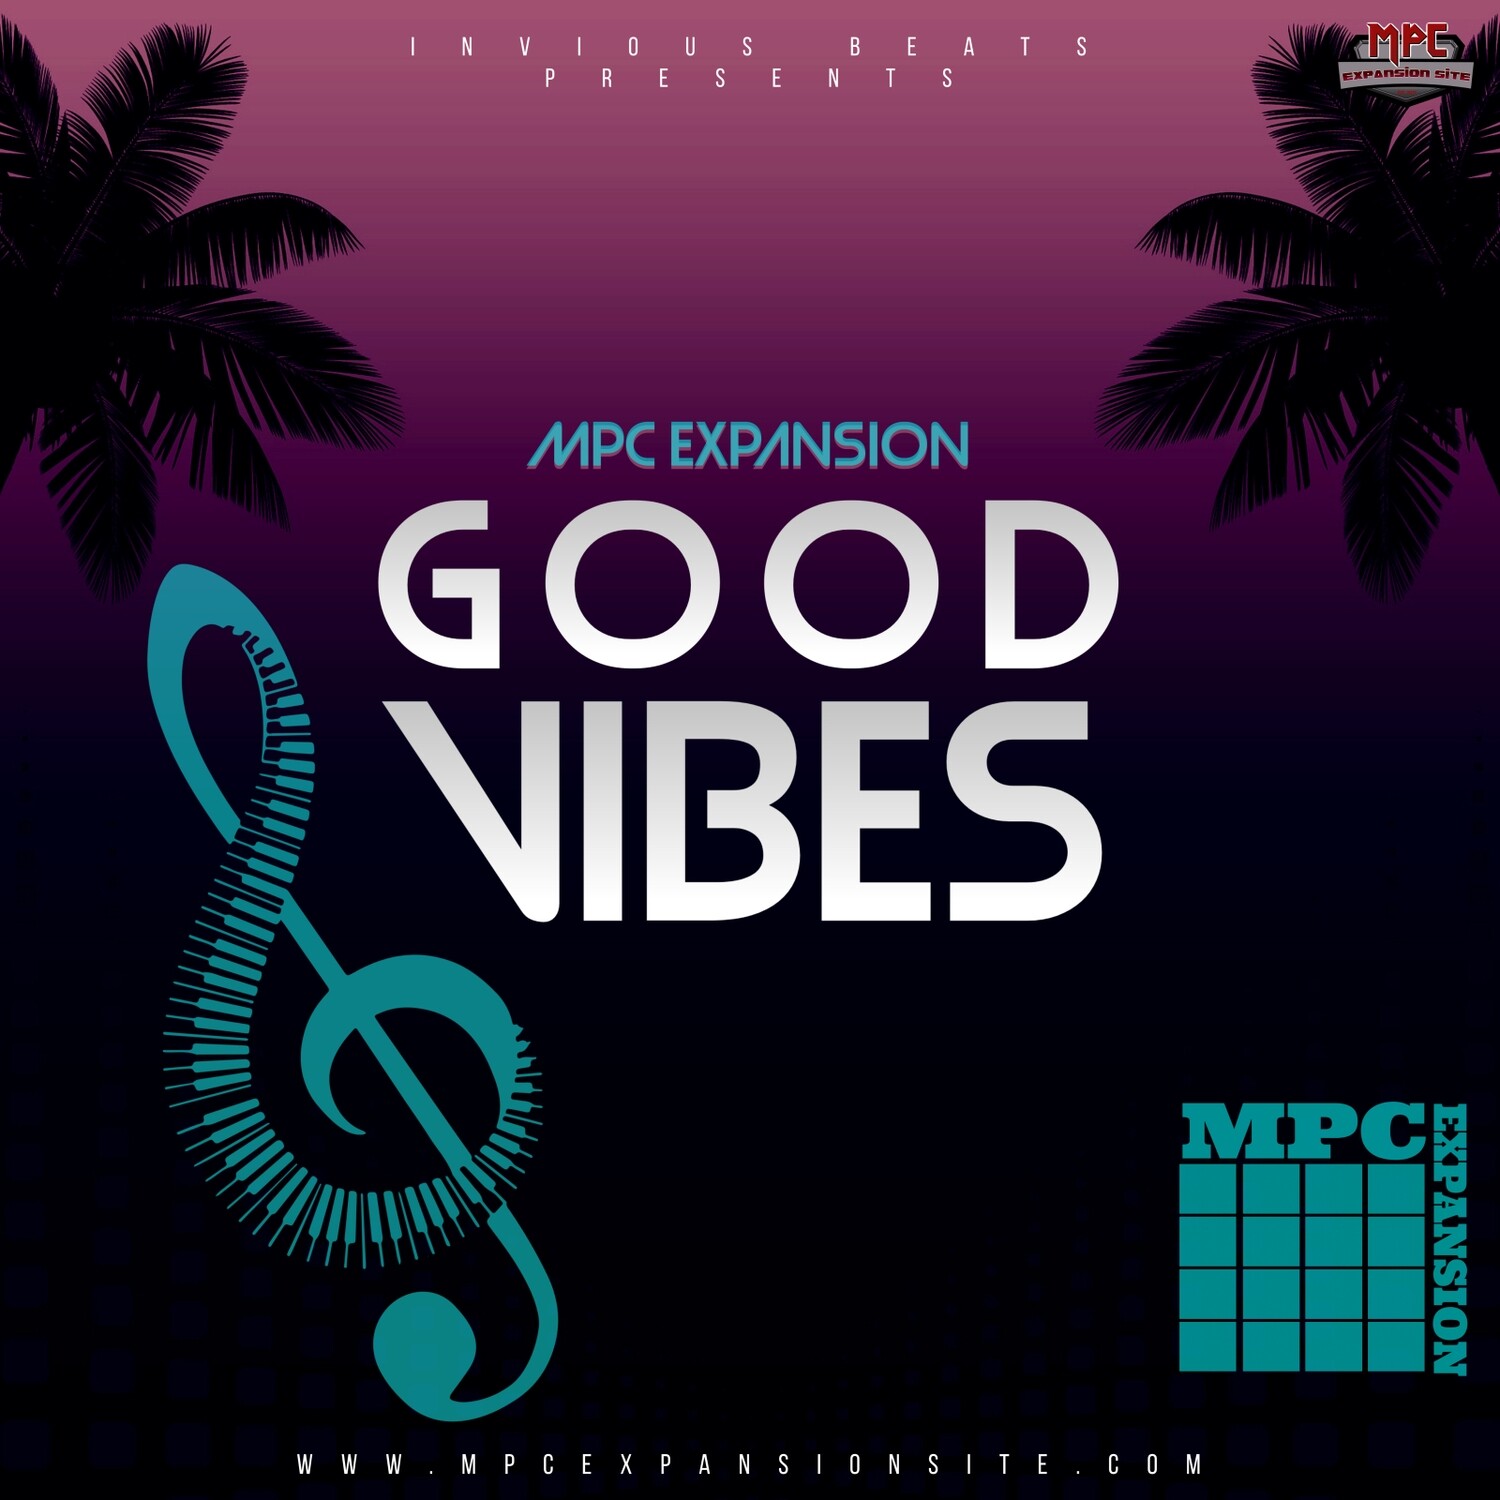 MPC EXPANSION 'GOOD VIBES' by INVIOUS